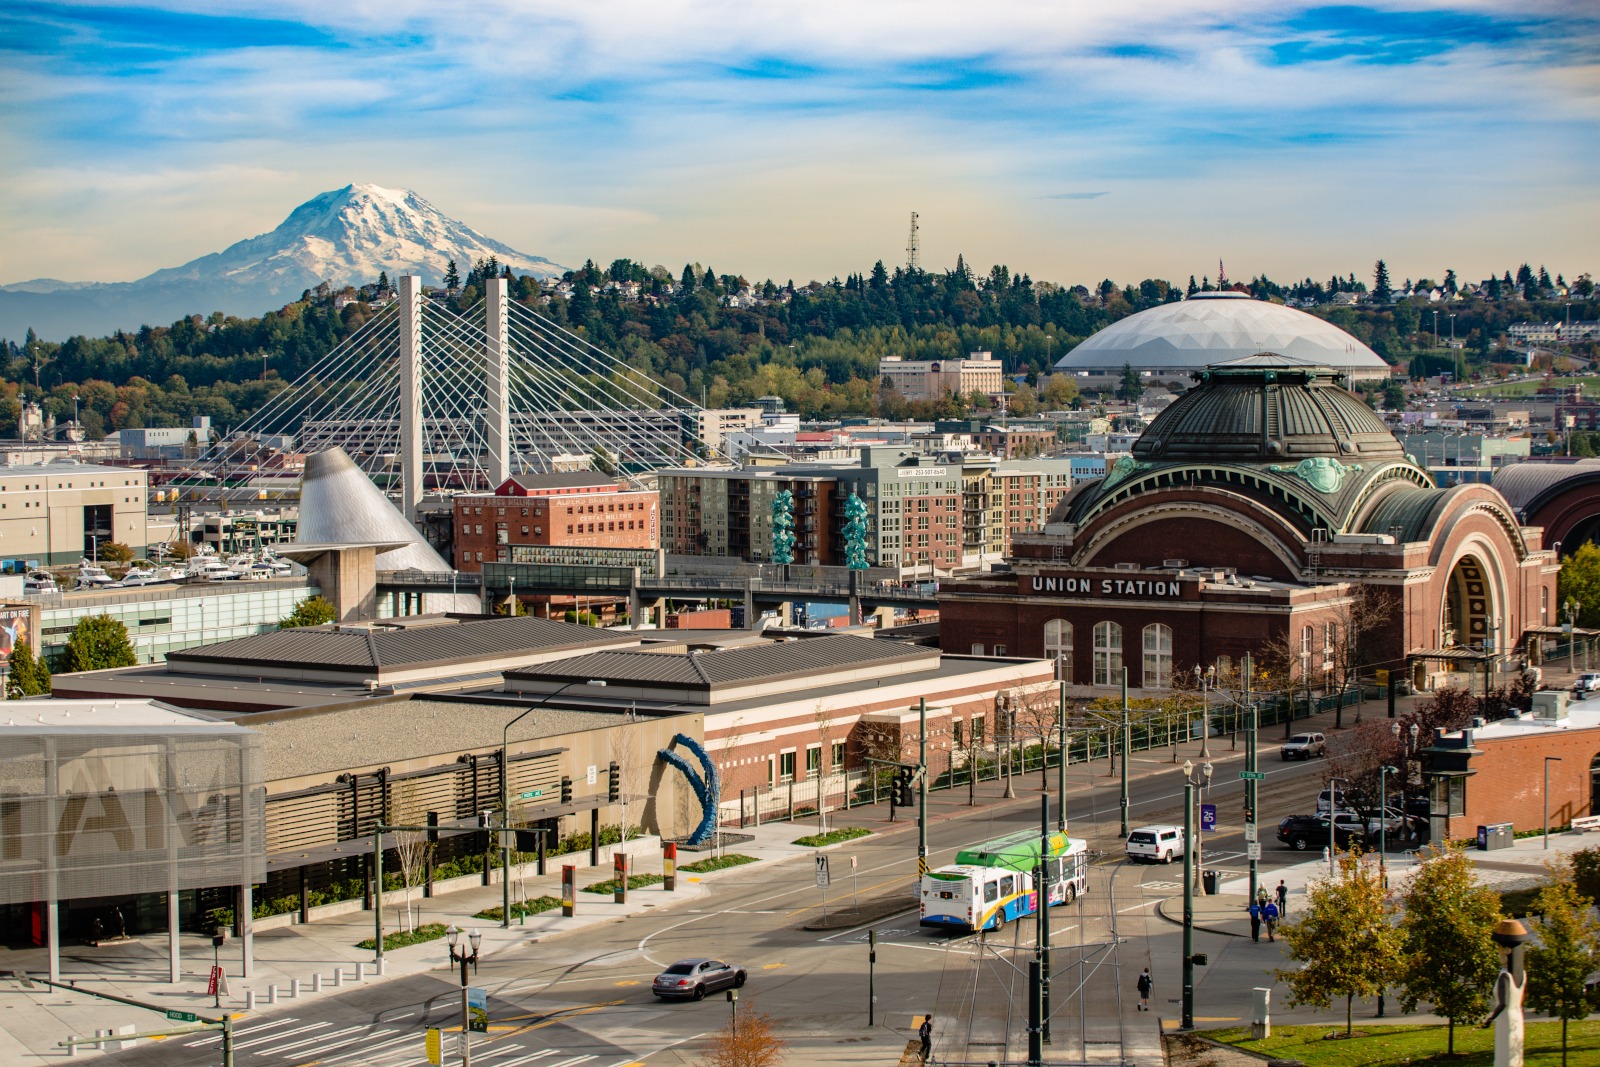 aerial shot of Tacoma Convention Center enjoys Mt. Rainer as a backdrop